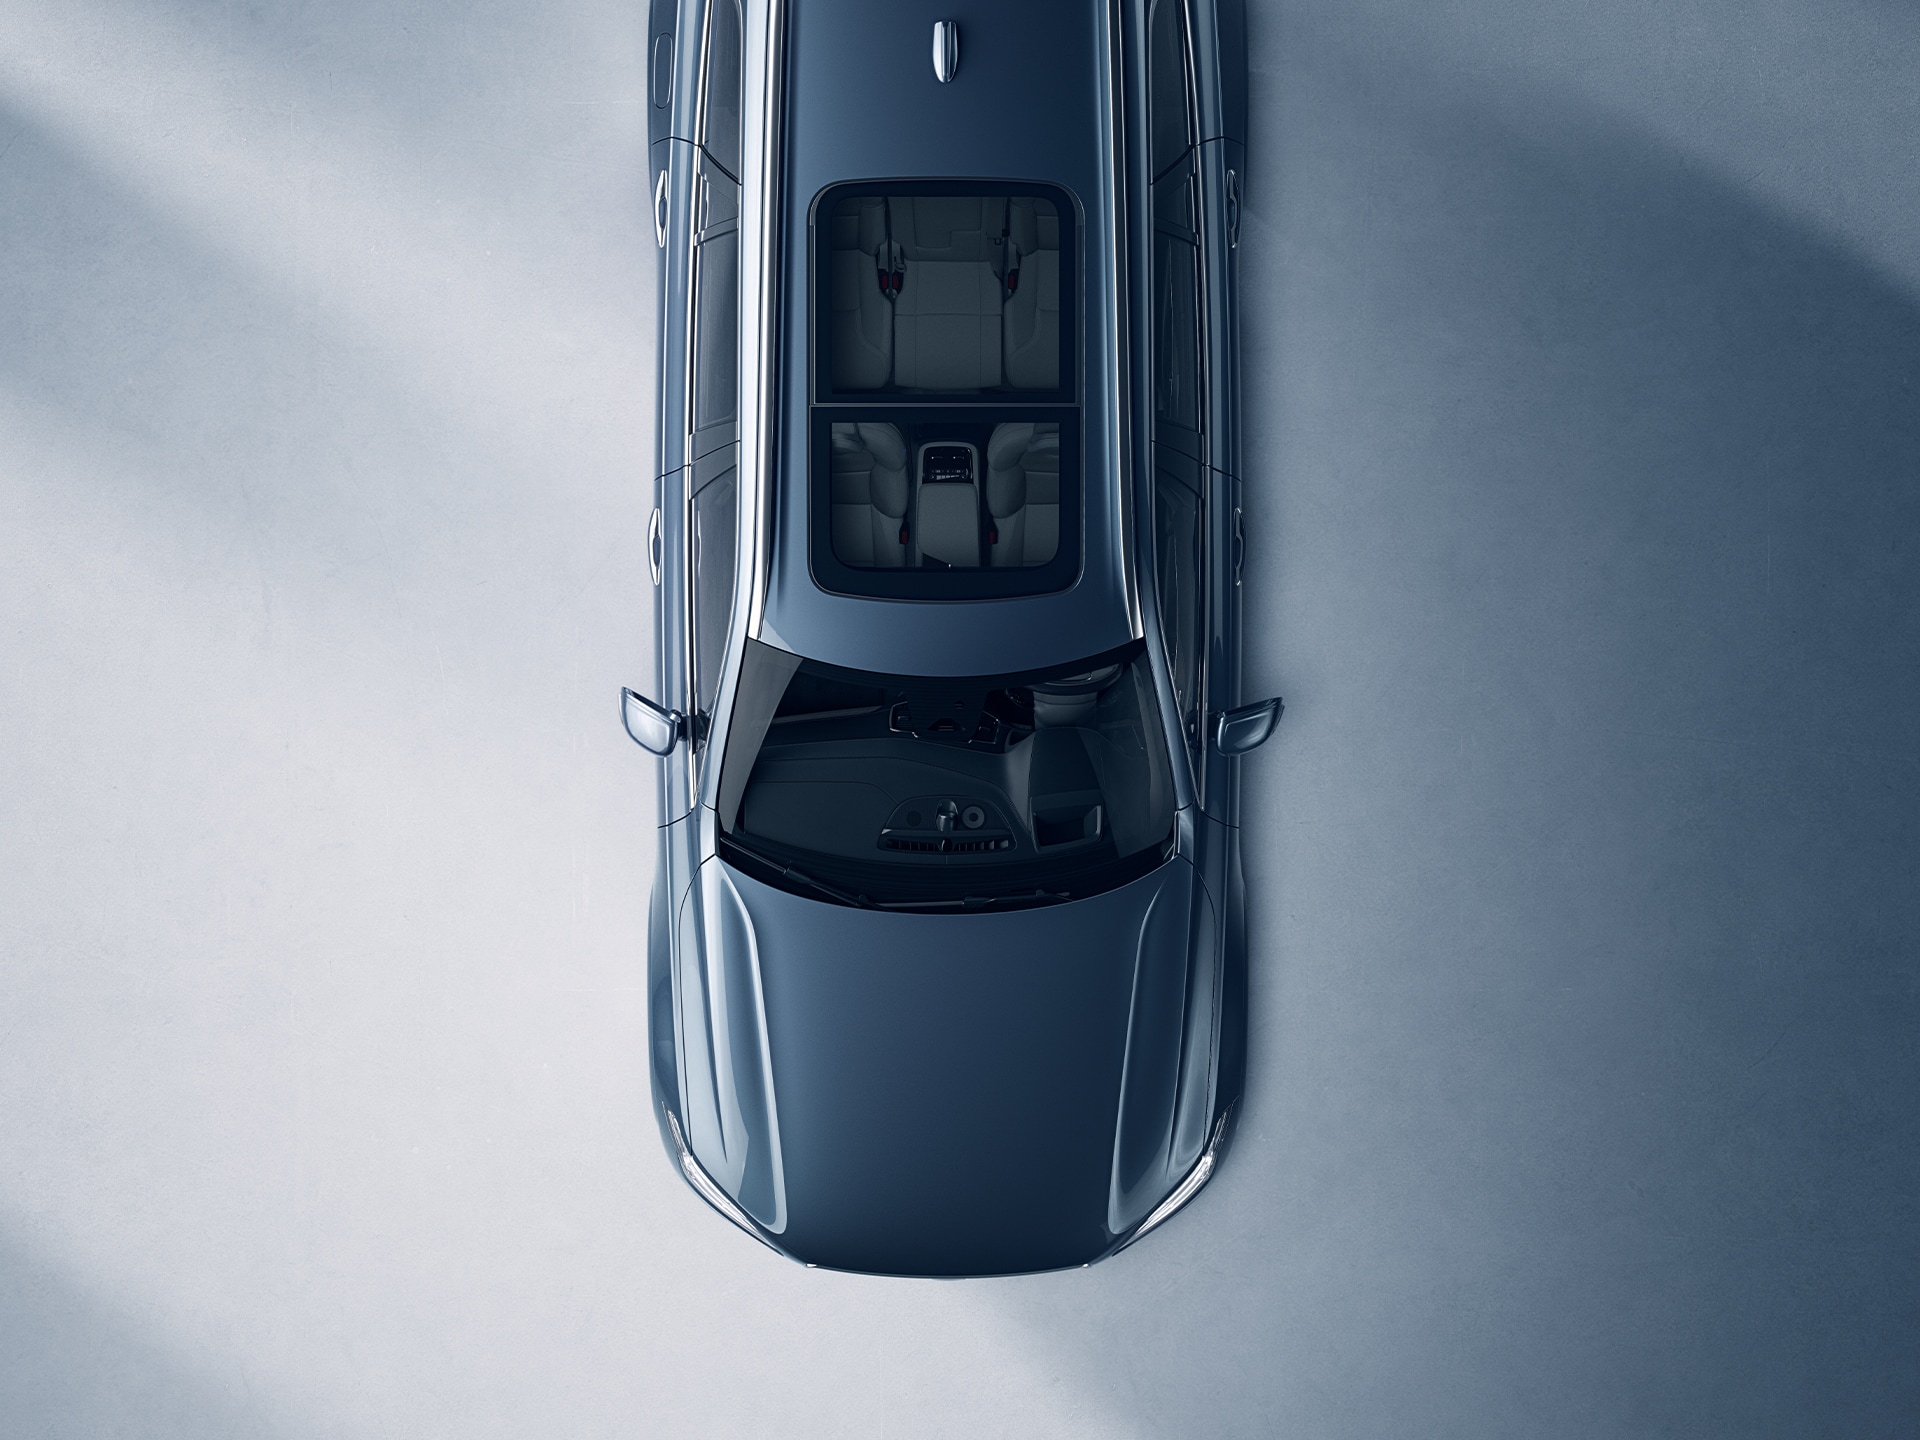 Panoramic roof on a Volvo XC90 SUV.